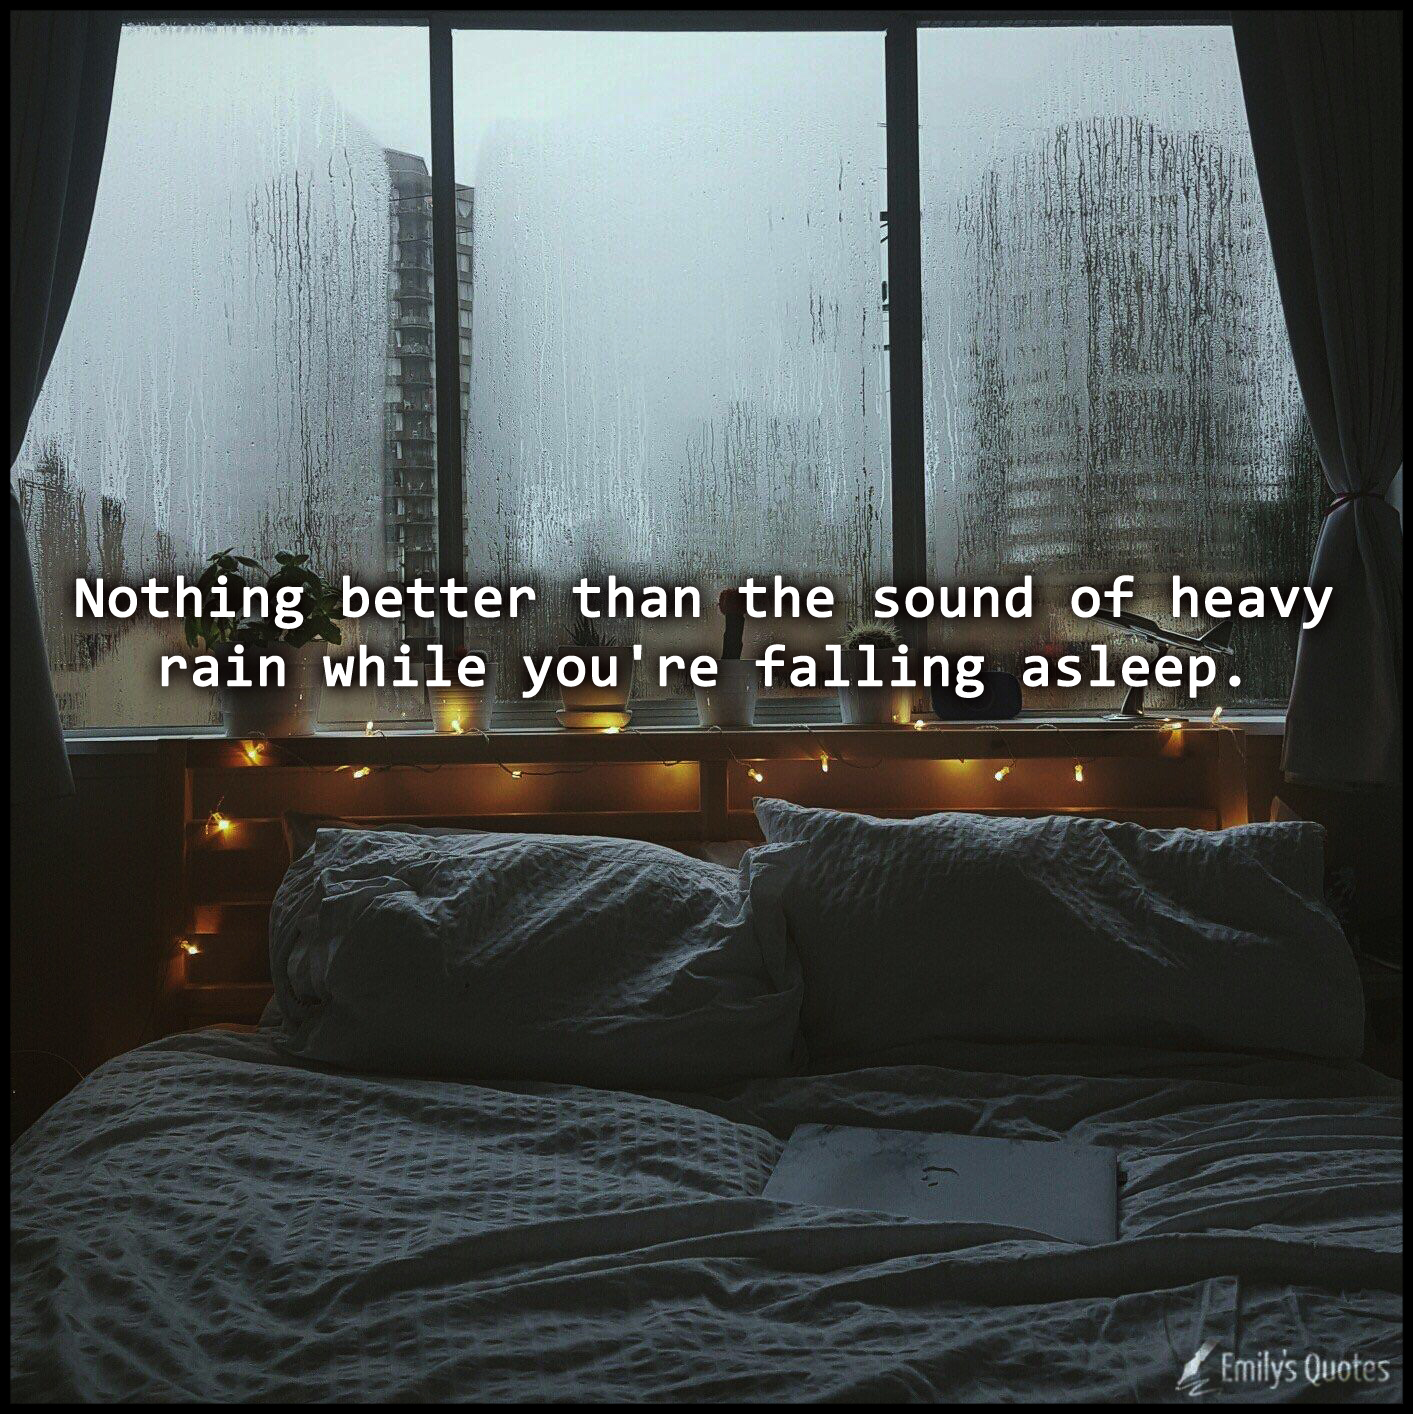 Nothing better than the sound of heavy rain while you’re falling asleep